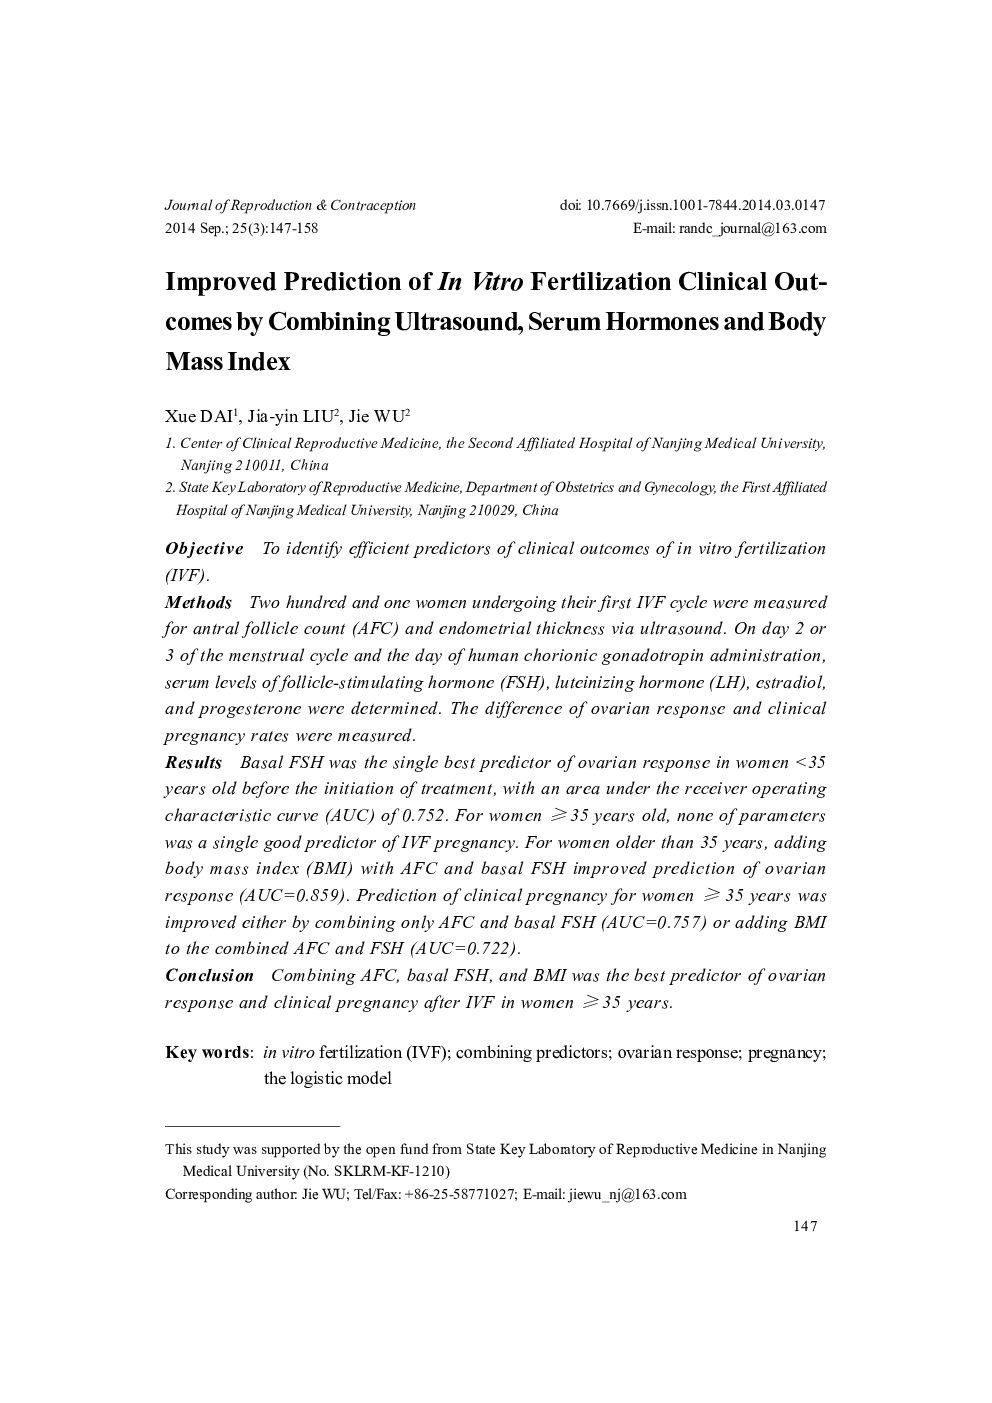 Improved Prediction of In Vitro Fertilization Clinical Outcomes by Combining Ultrasound, Serum Hormones and Body Mass Index 